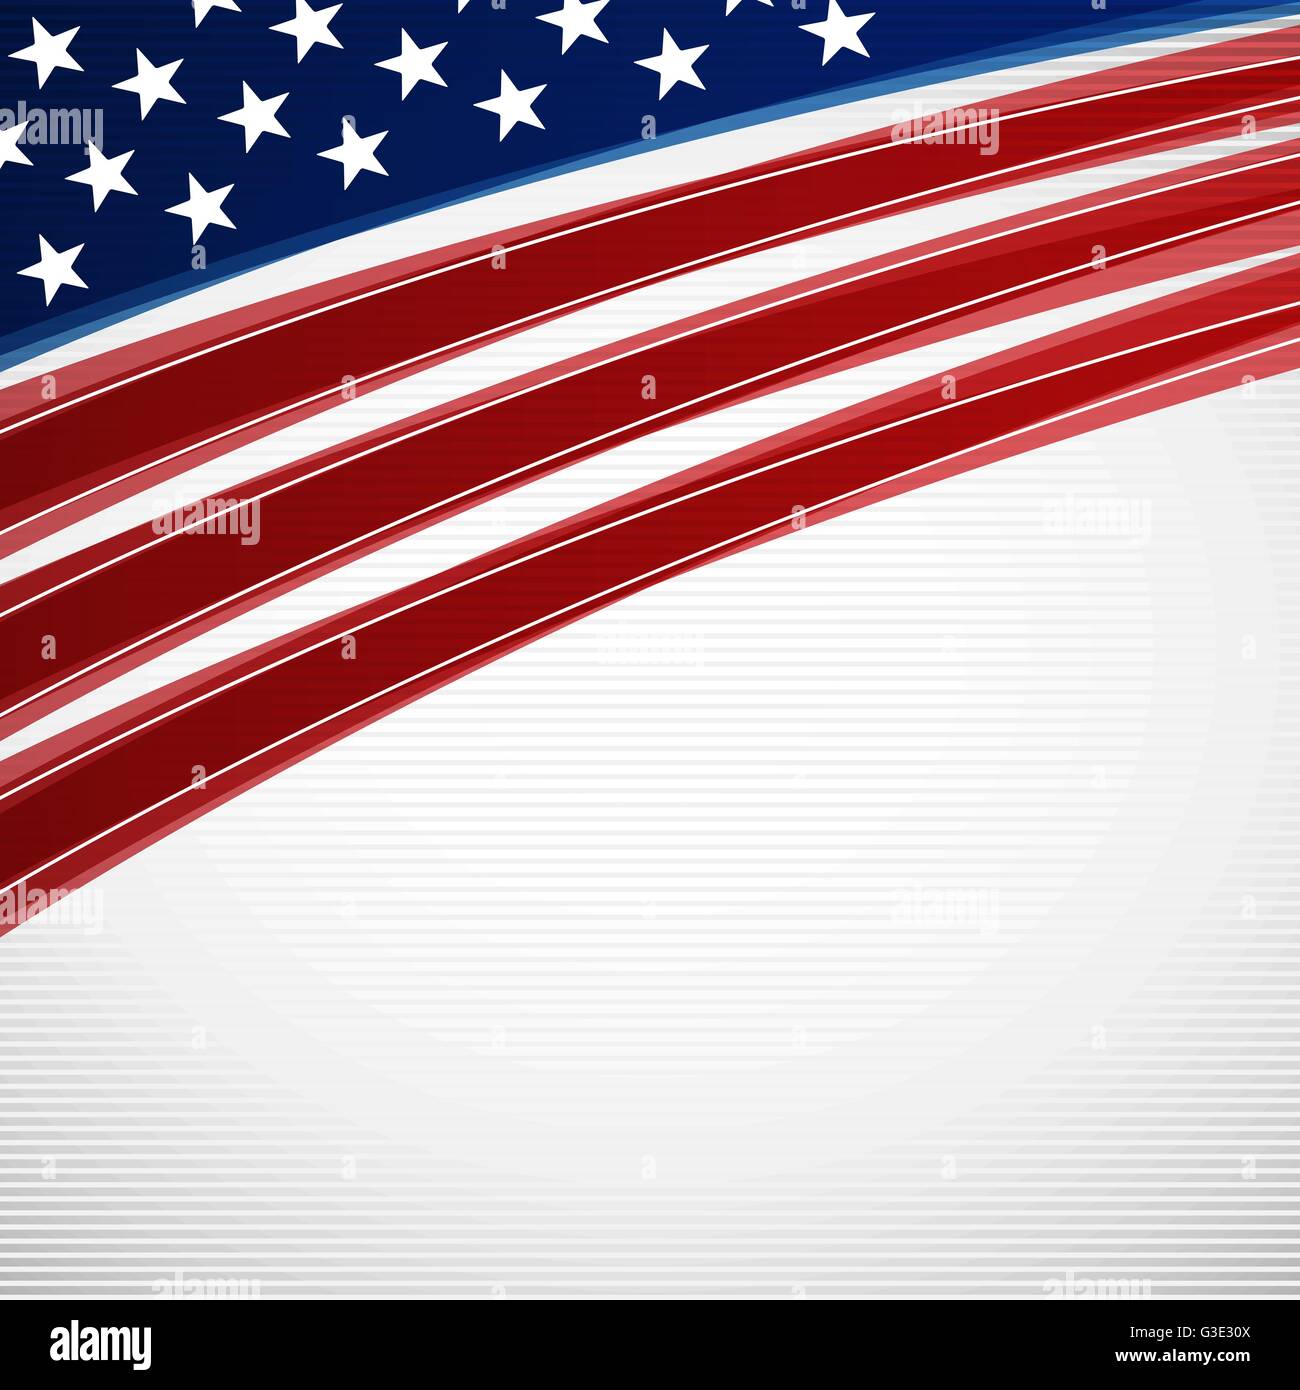 Vector illustration of abstract american flag background for your design Stock Vector